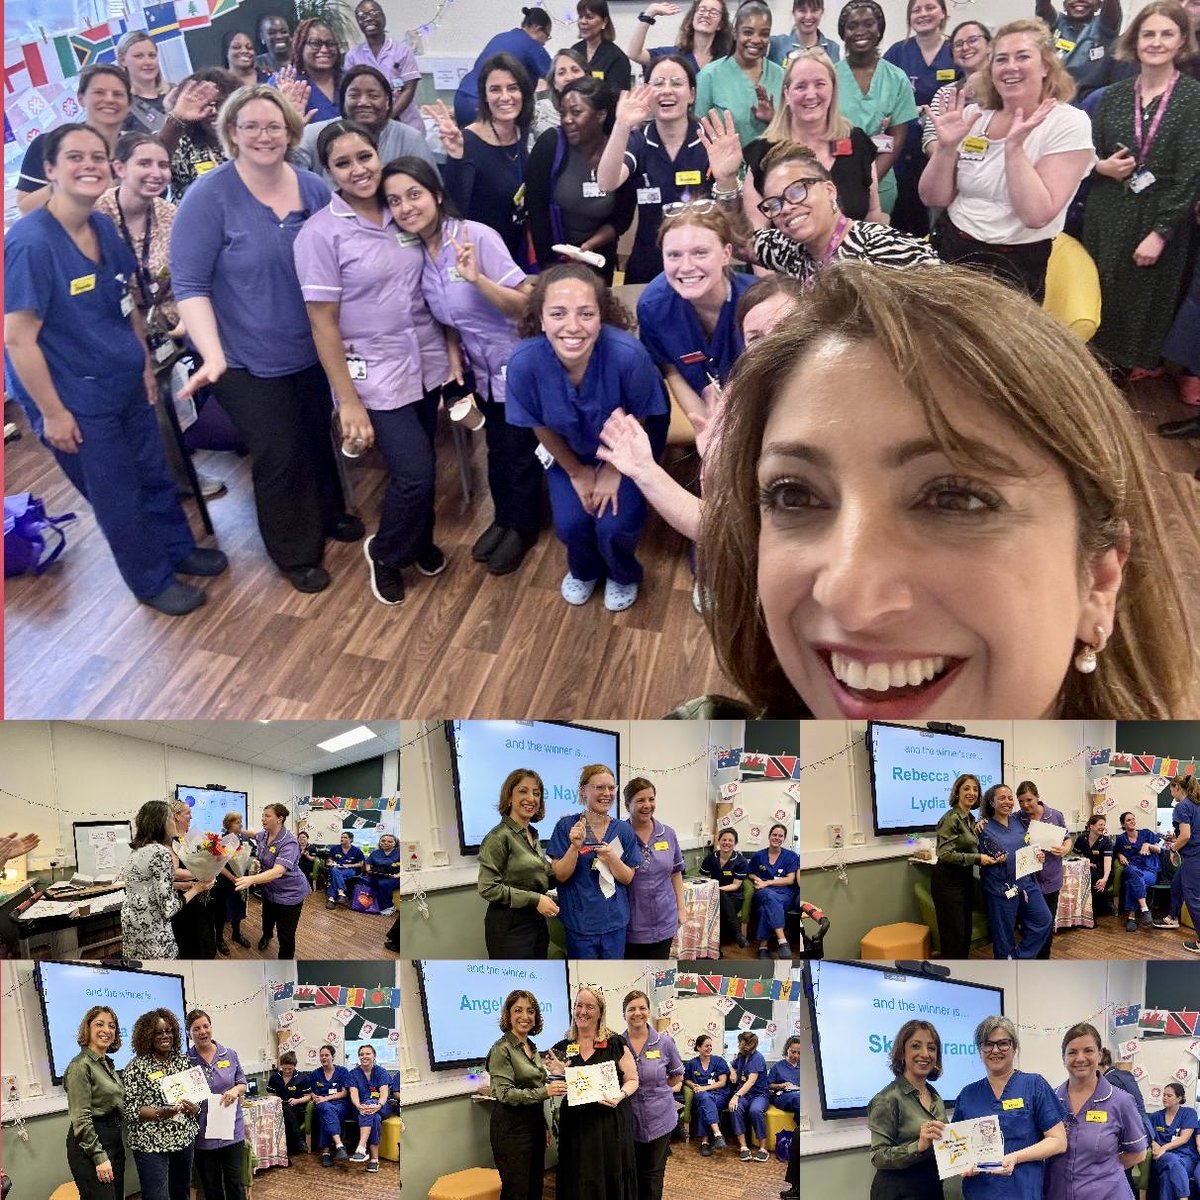 Continuing #IDM2024 celebration ⁦@StGeorgesTrust⁩ recognising our incredible midwives, 🙏 for your care, compassion & dedication. Your work matters! ⁦@TotterdellJac⁩ ⁦@MidwivesRCM⁩ ⁦@CMidOEngland⁩ ⁦@CapitalMidwife⁩ ⁦@NHSEnglandLDN⁩